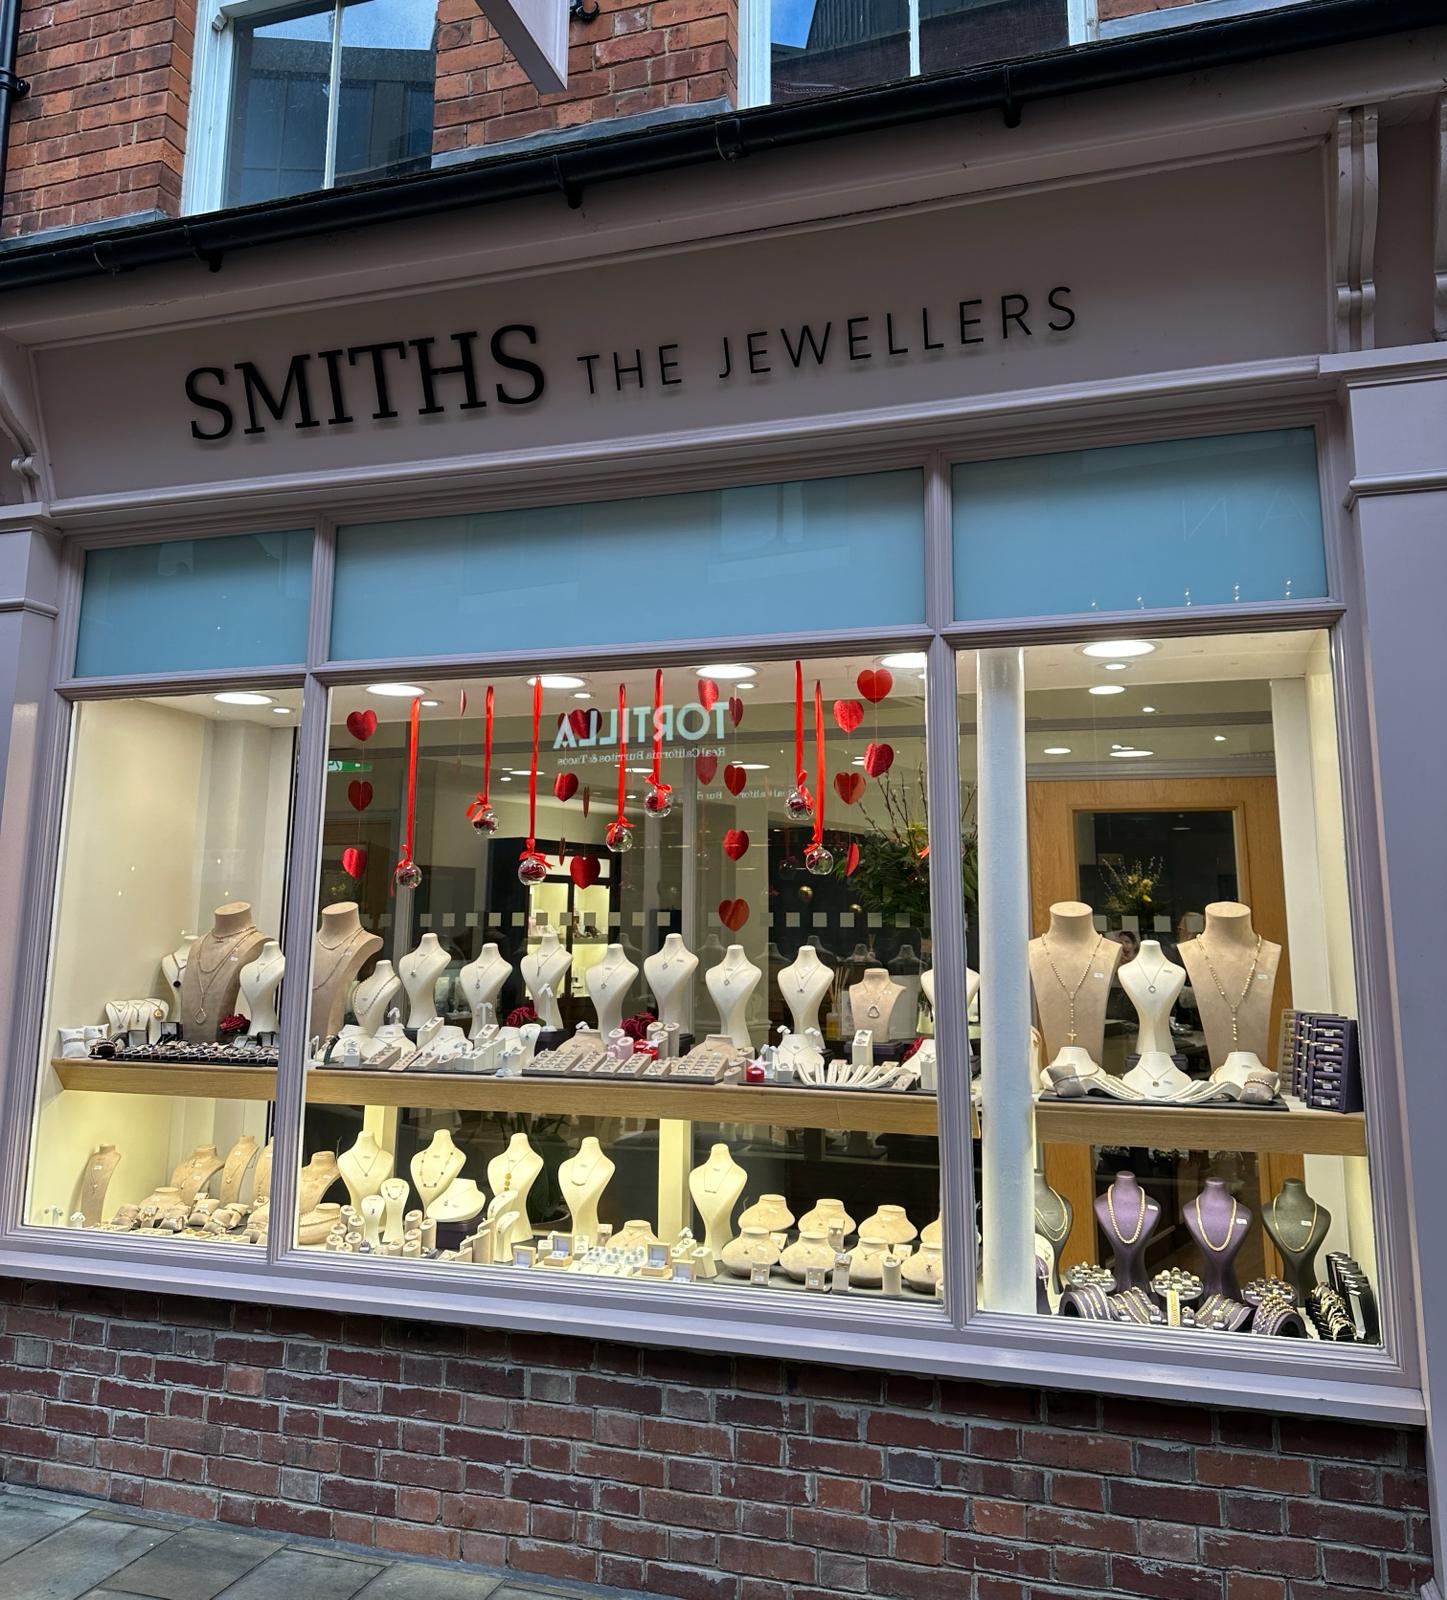 Lady looking at a jewellery display